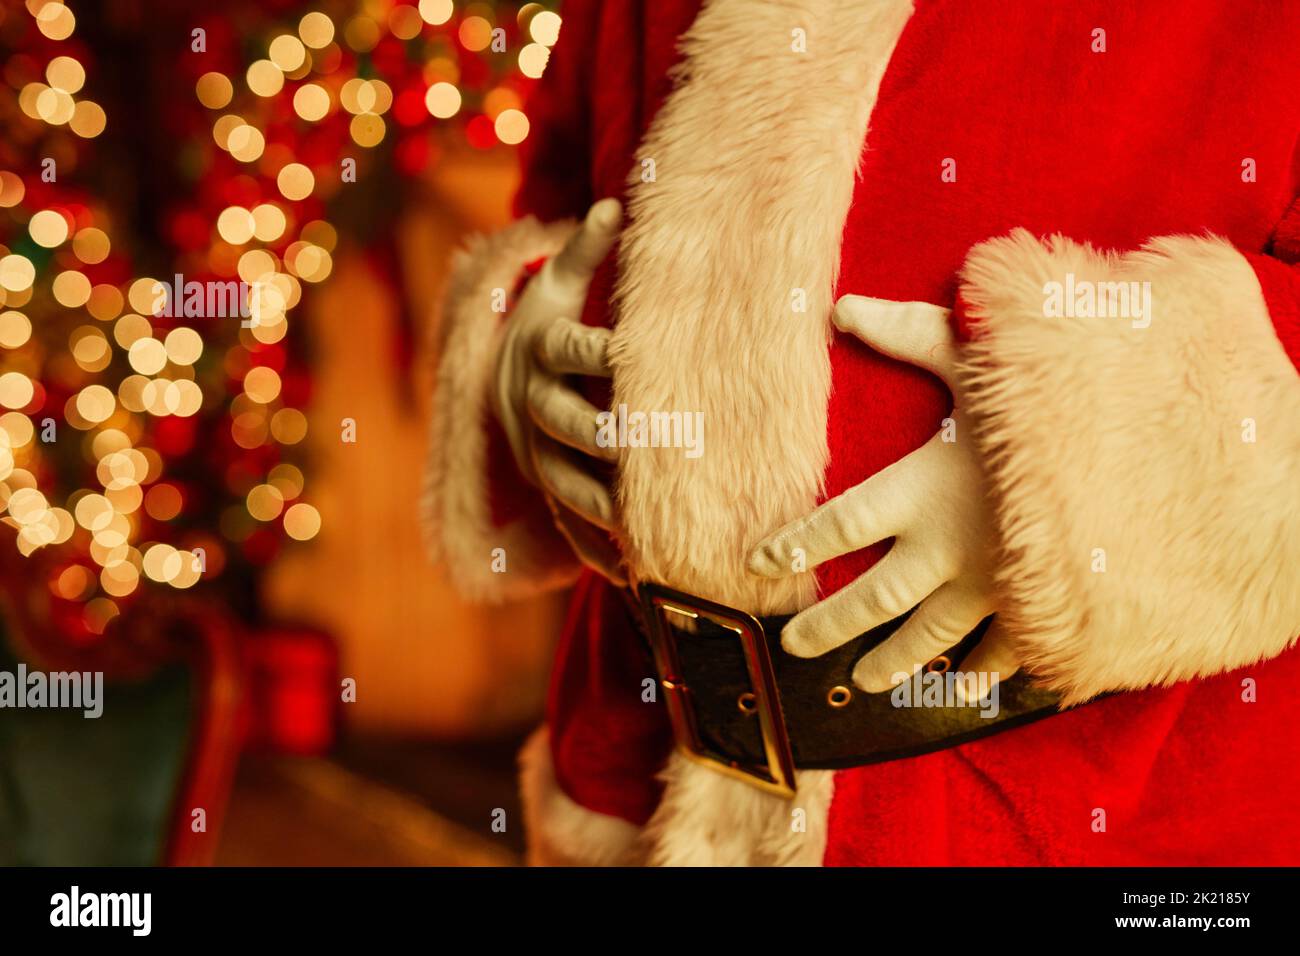 Christmas background image with unrecognizable Santa Claus wearing red suit, copy space Stock Photo